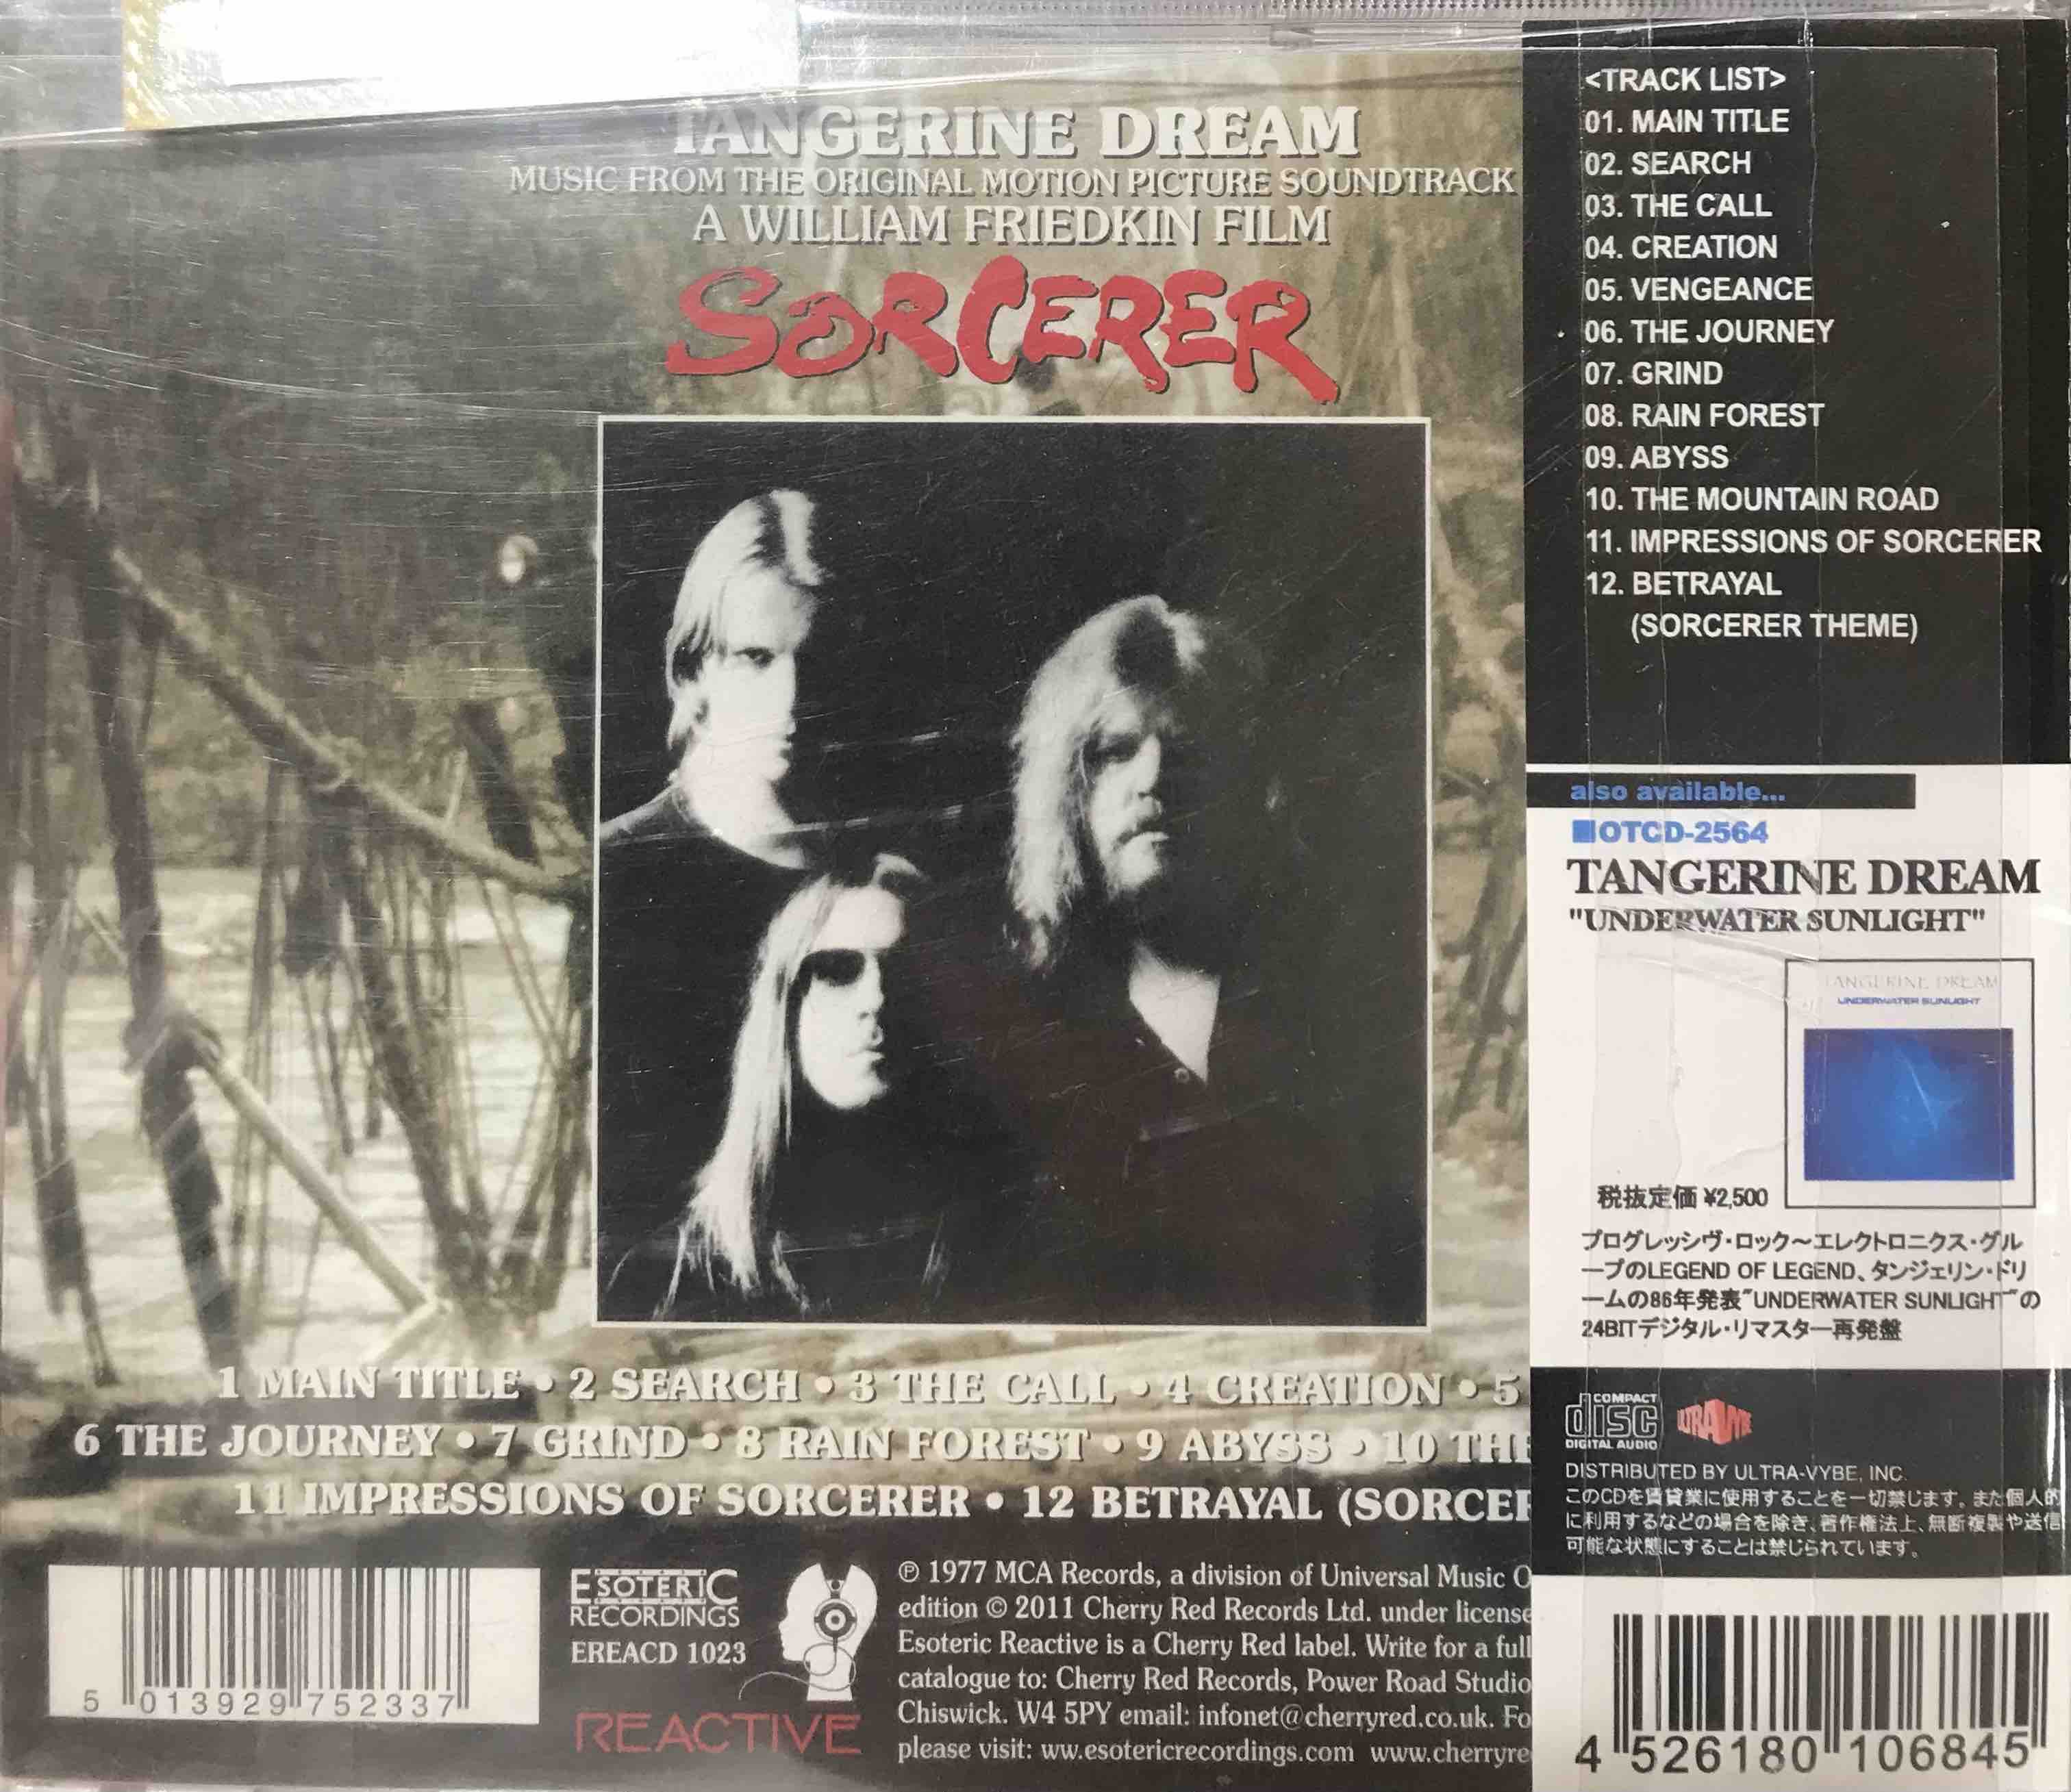 Tangerine Dream ‎– Sorcerer (Music From The Original Motion Picture Soundtrack)